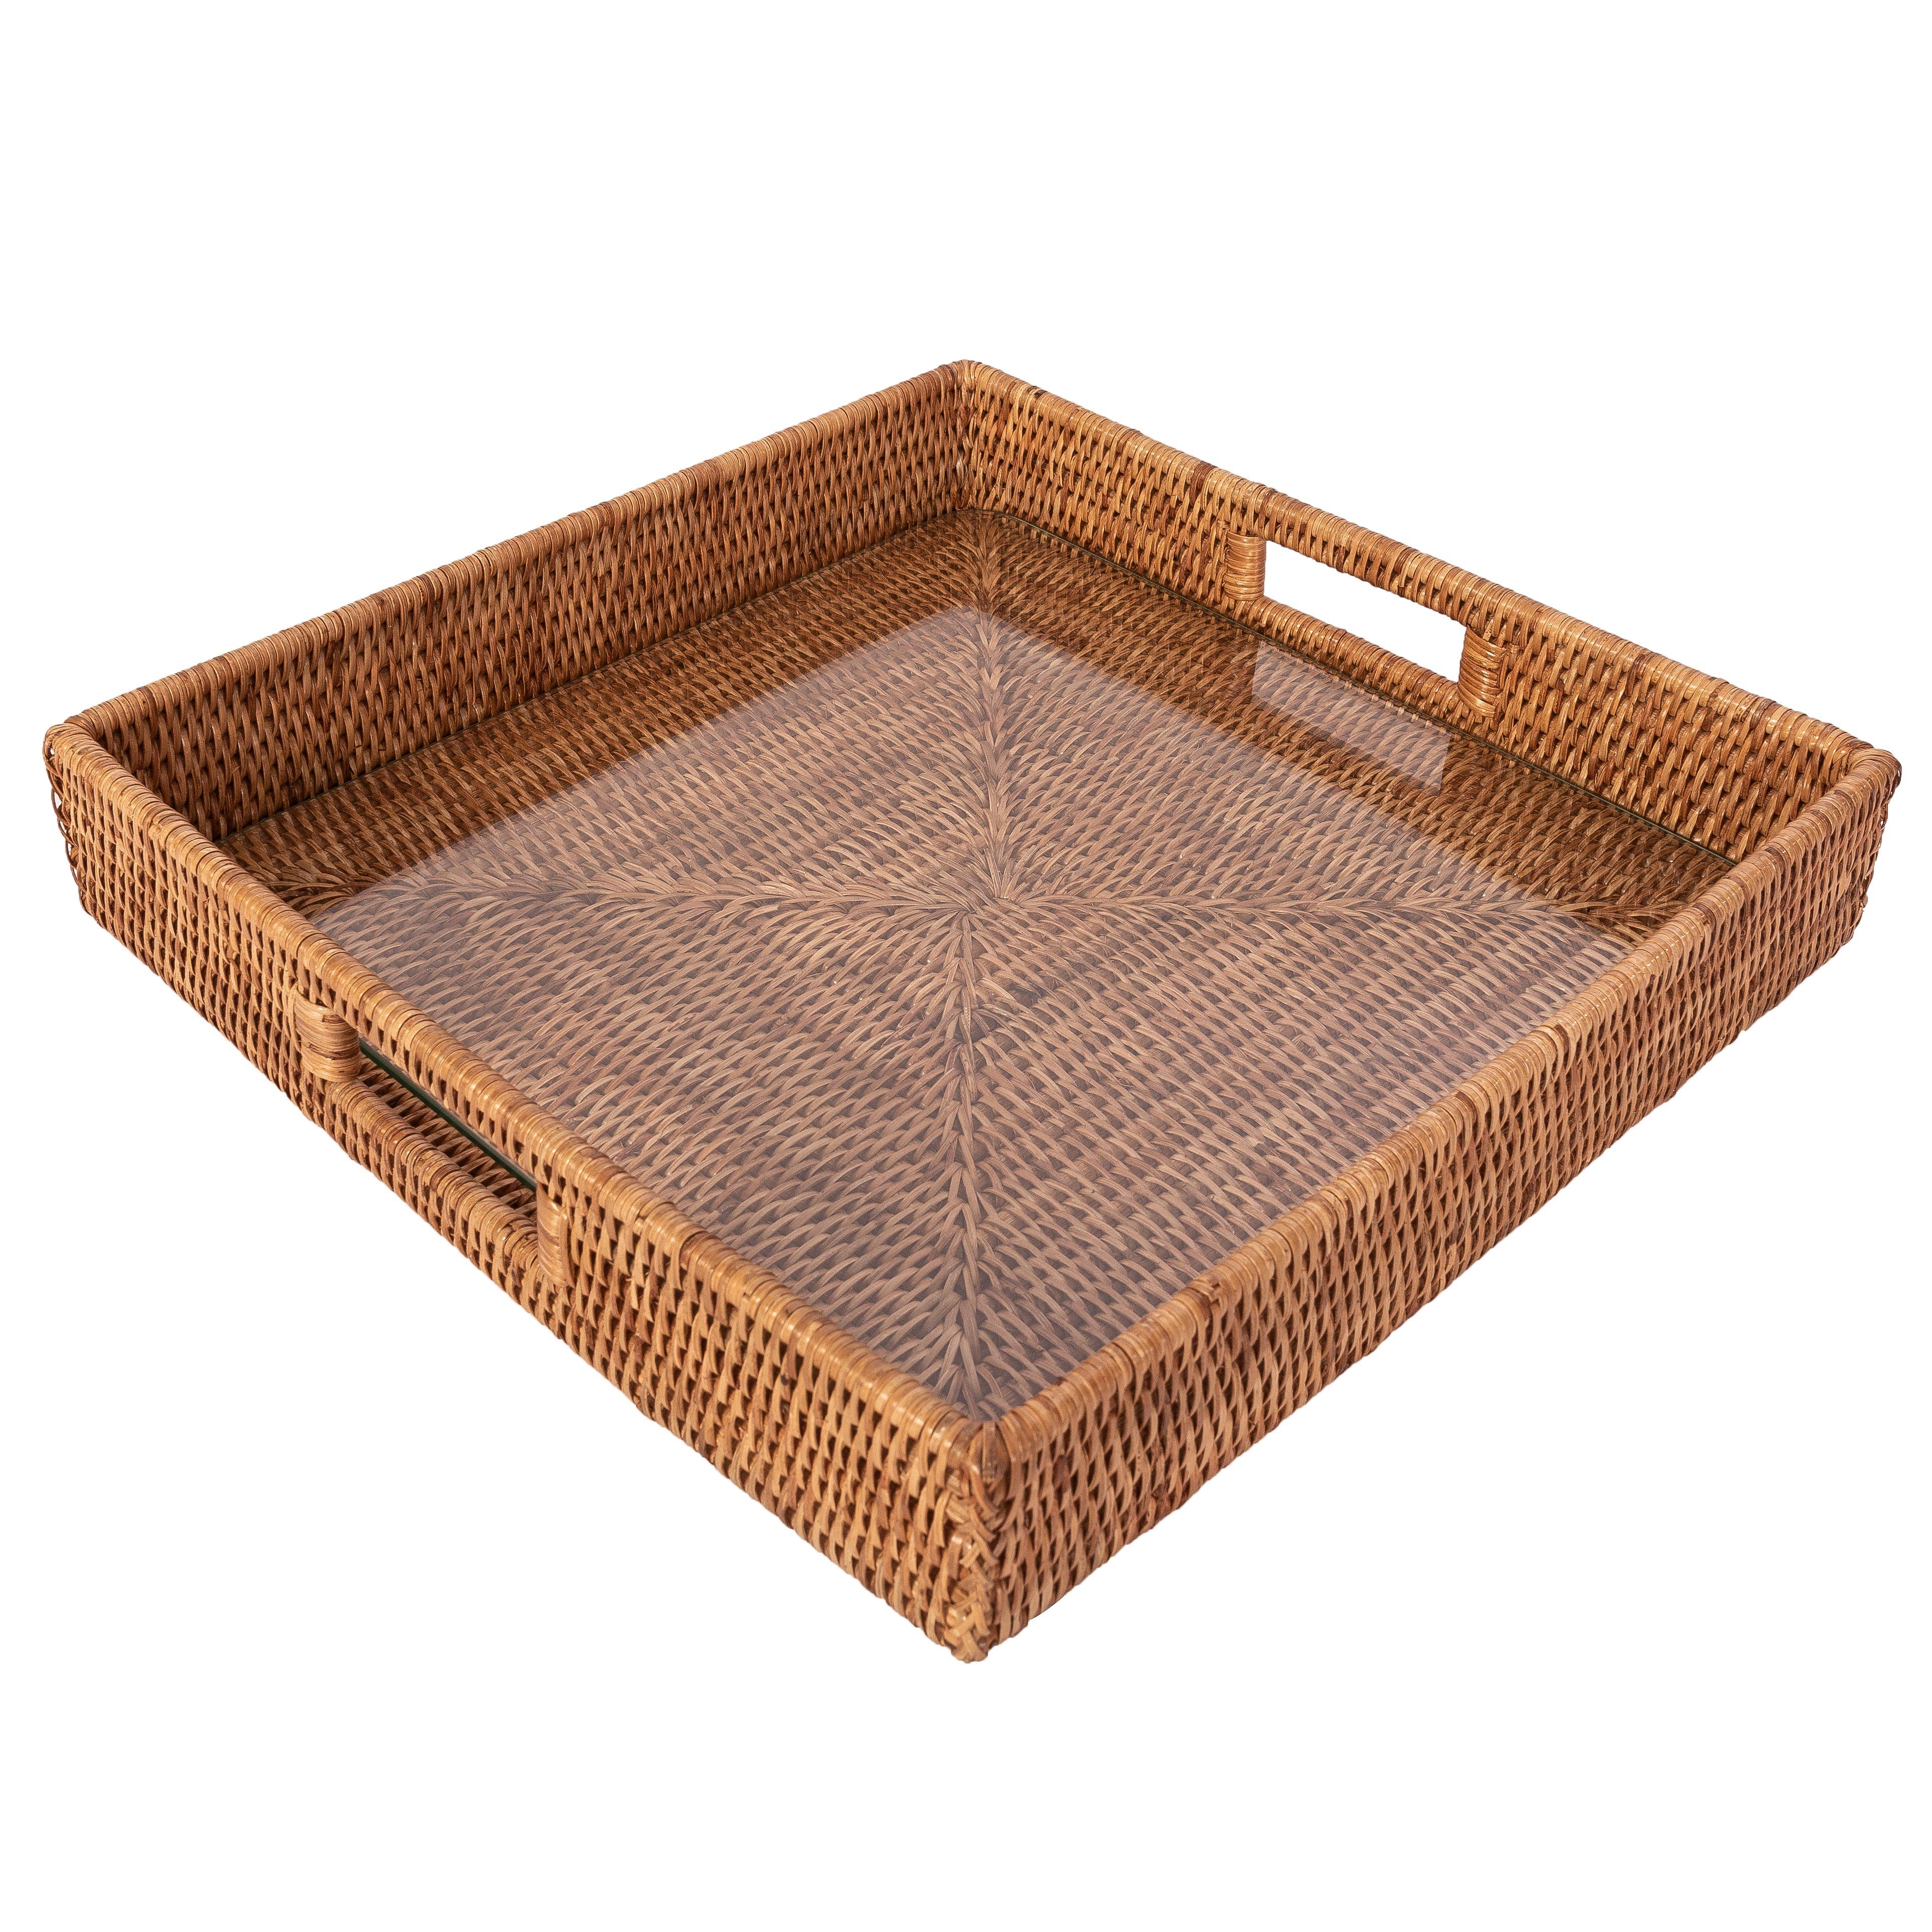 16" Rattan Square Serving Ottoman Tray with Glass Insert:  White Wash